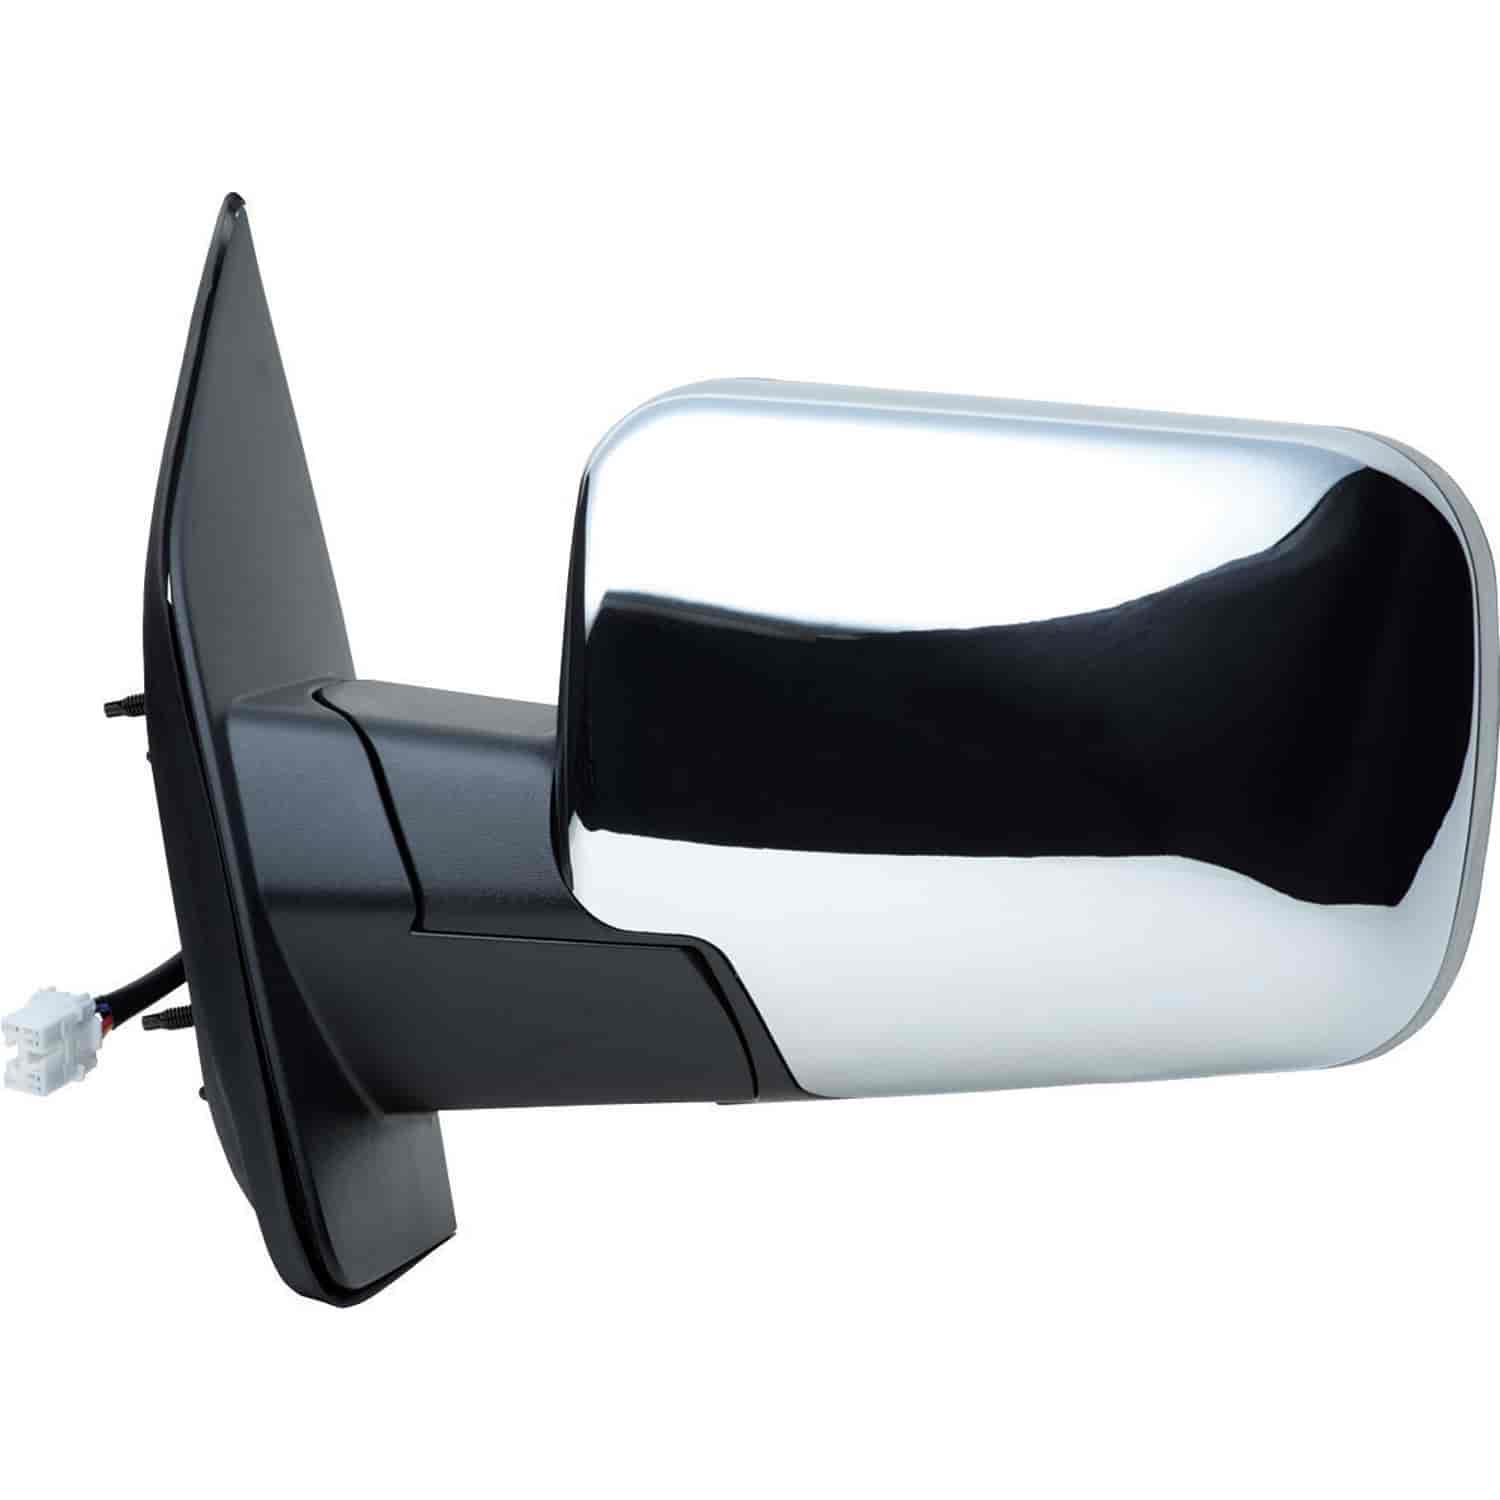 OEM Style Replacement mirror for 04-10 INFINITY QX56